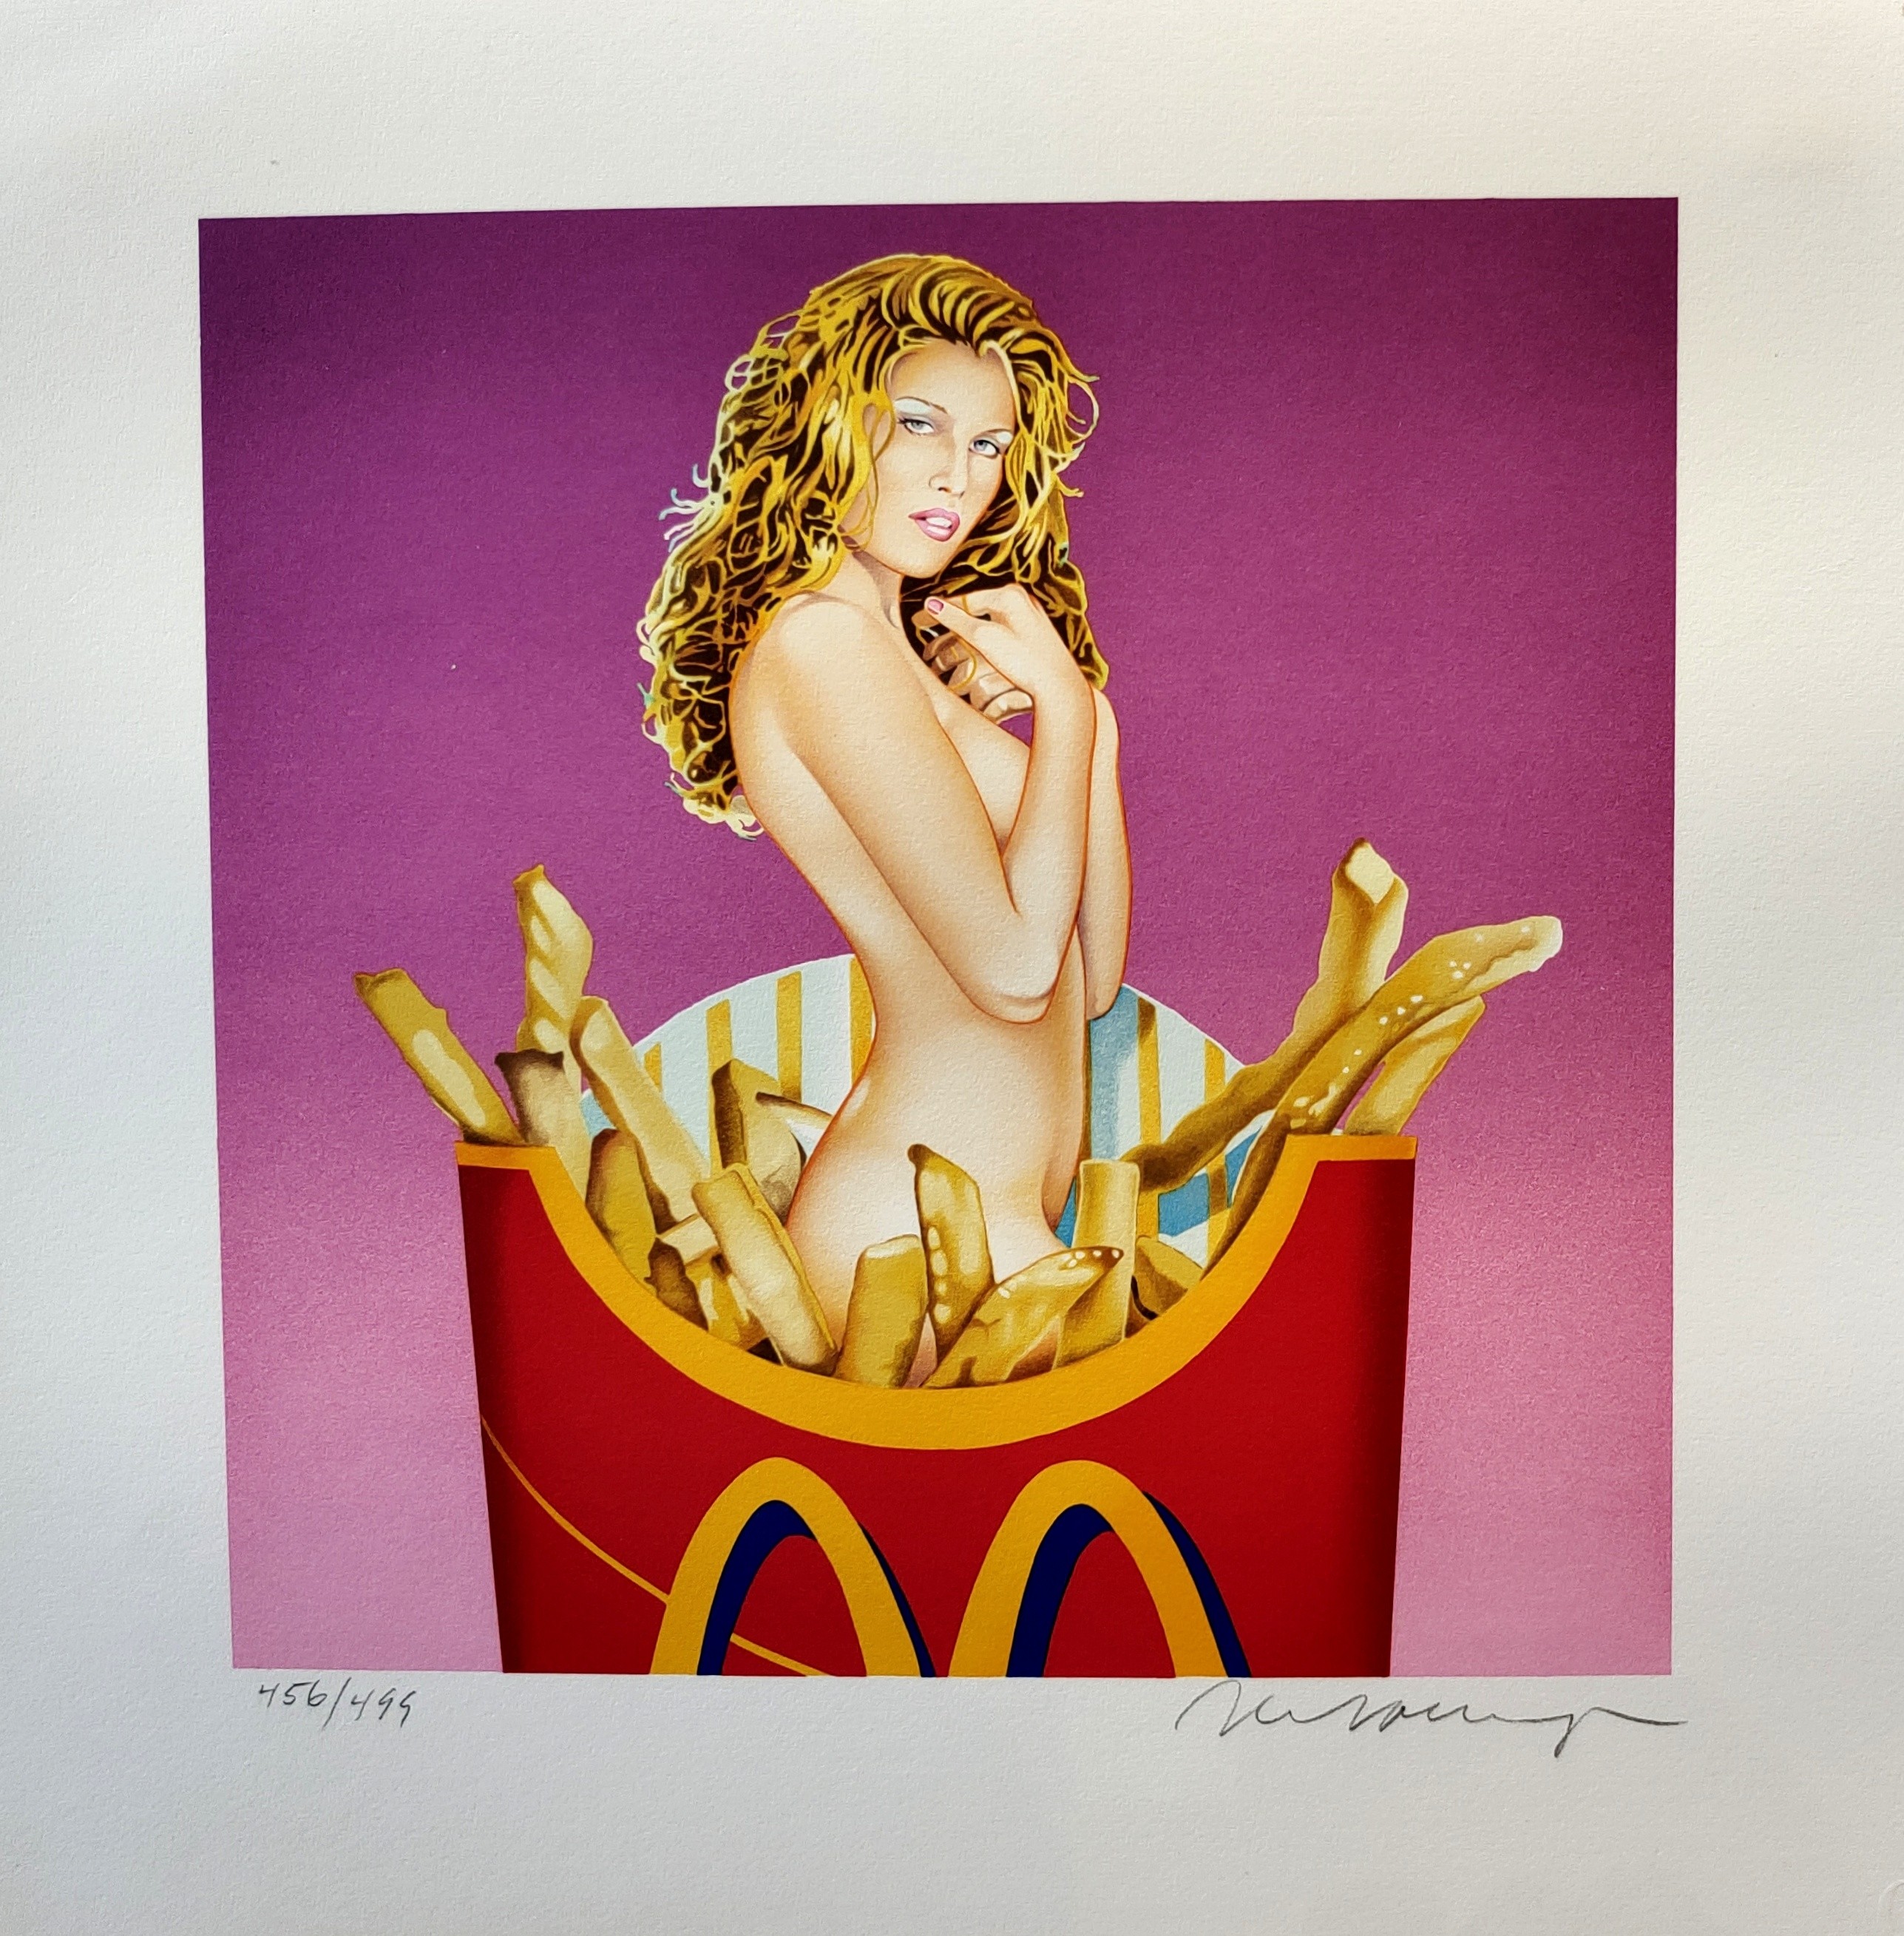  Ramos (1935-2018) "French Fries - 2002"